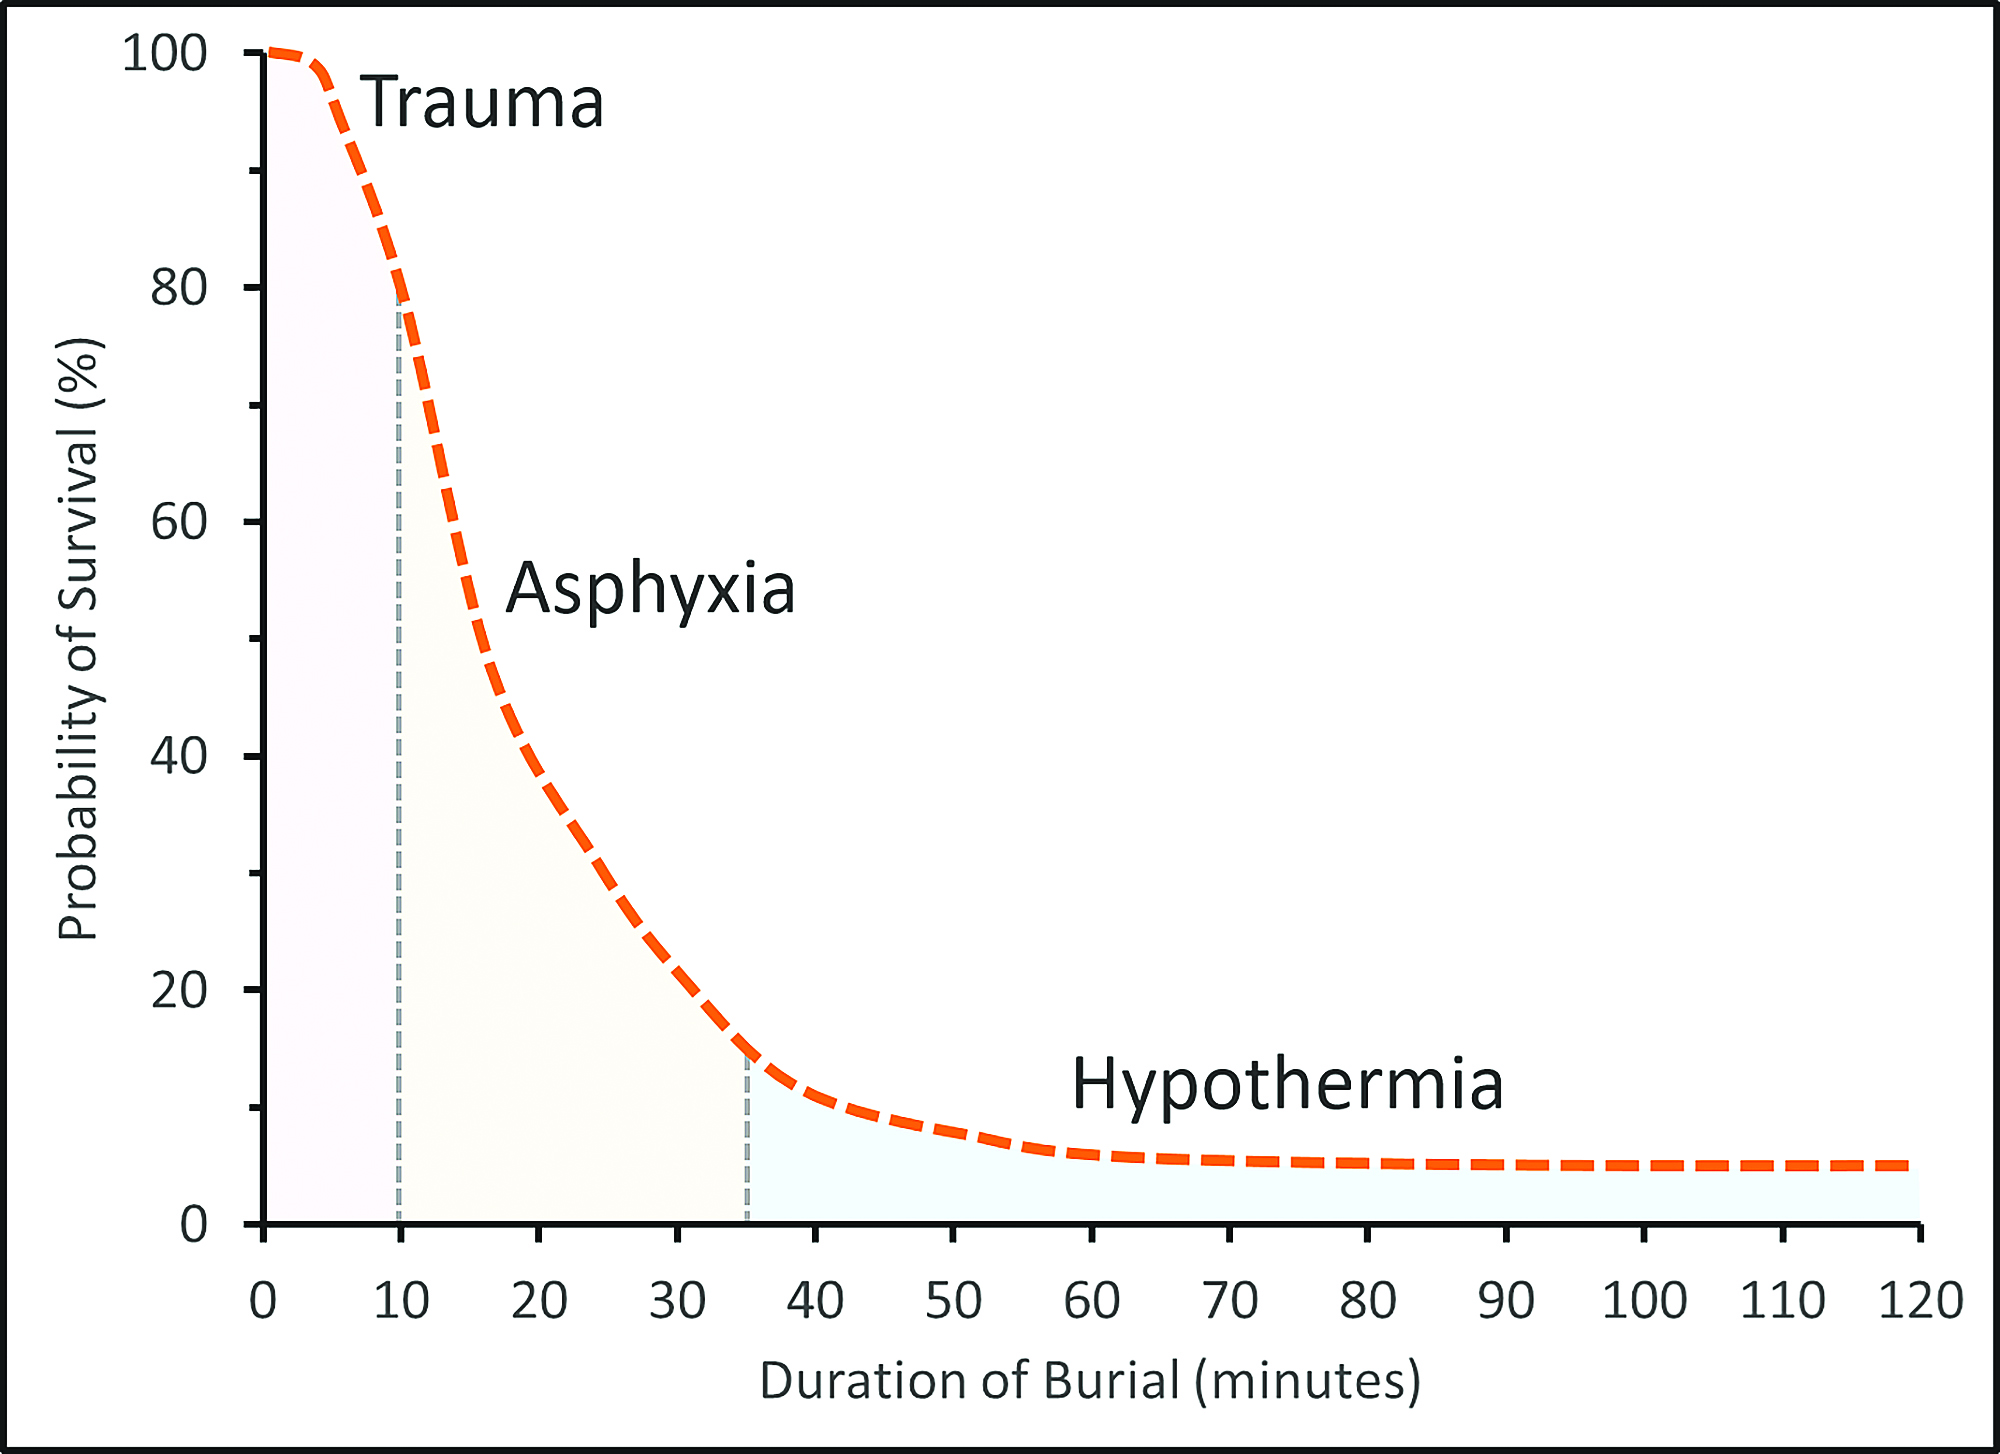 The avalanche survival curve. You have 10 minutes to rescue you someone during which there's an 80% chance of survival.